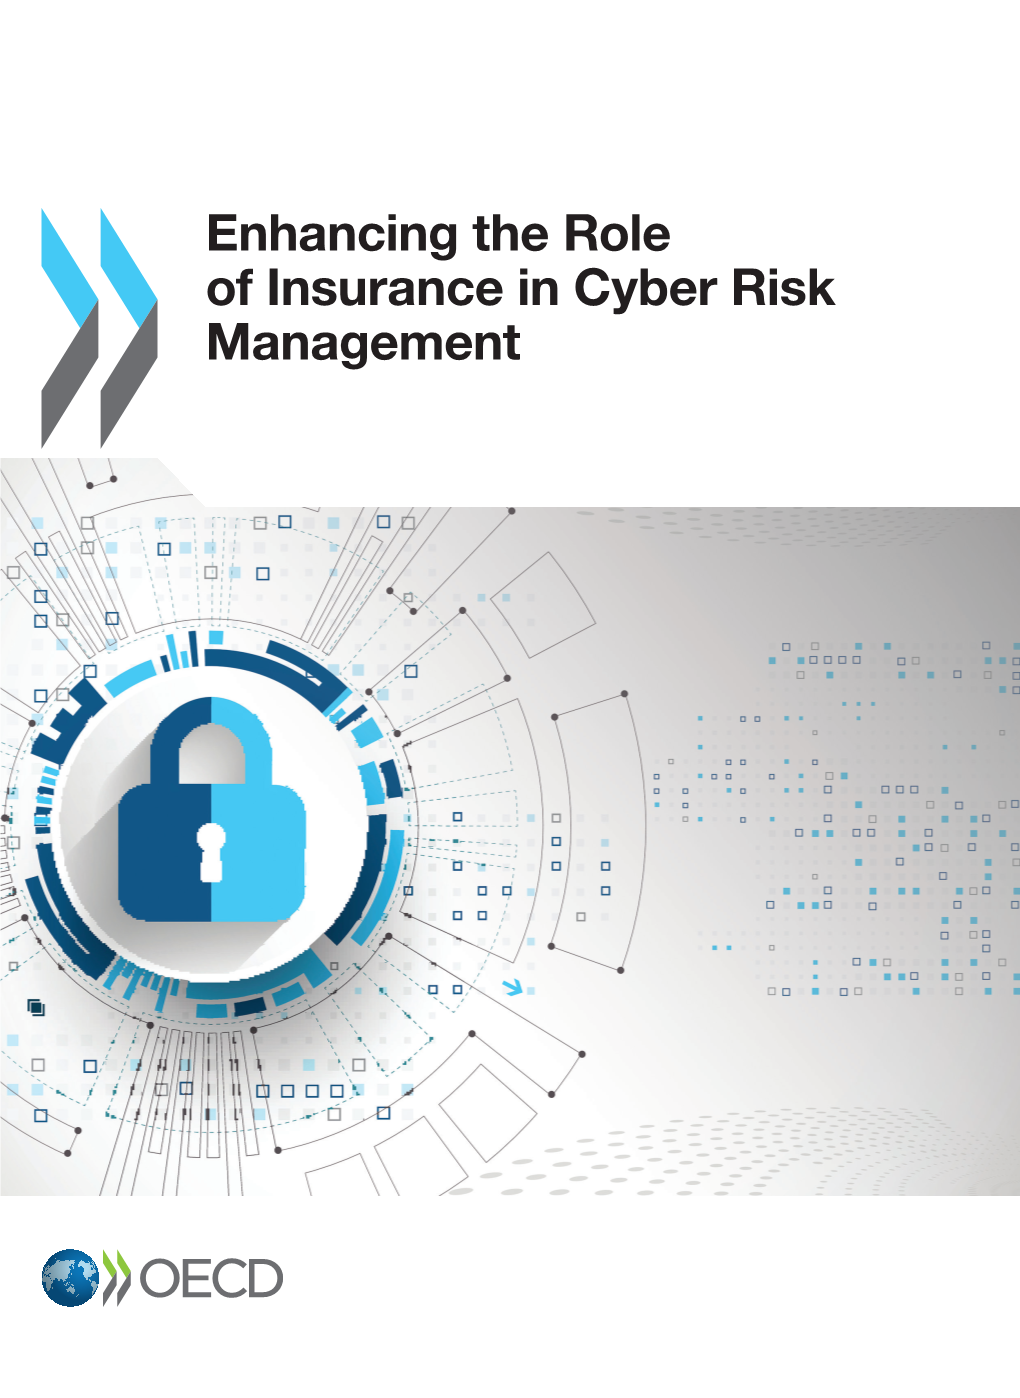 Enhancing the Role of Insurance in Cyber Risk Management